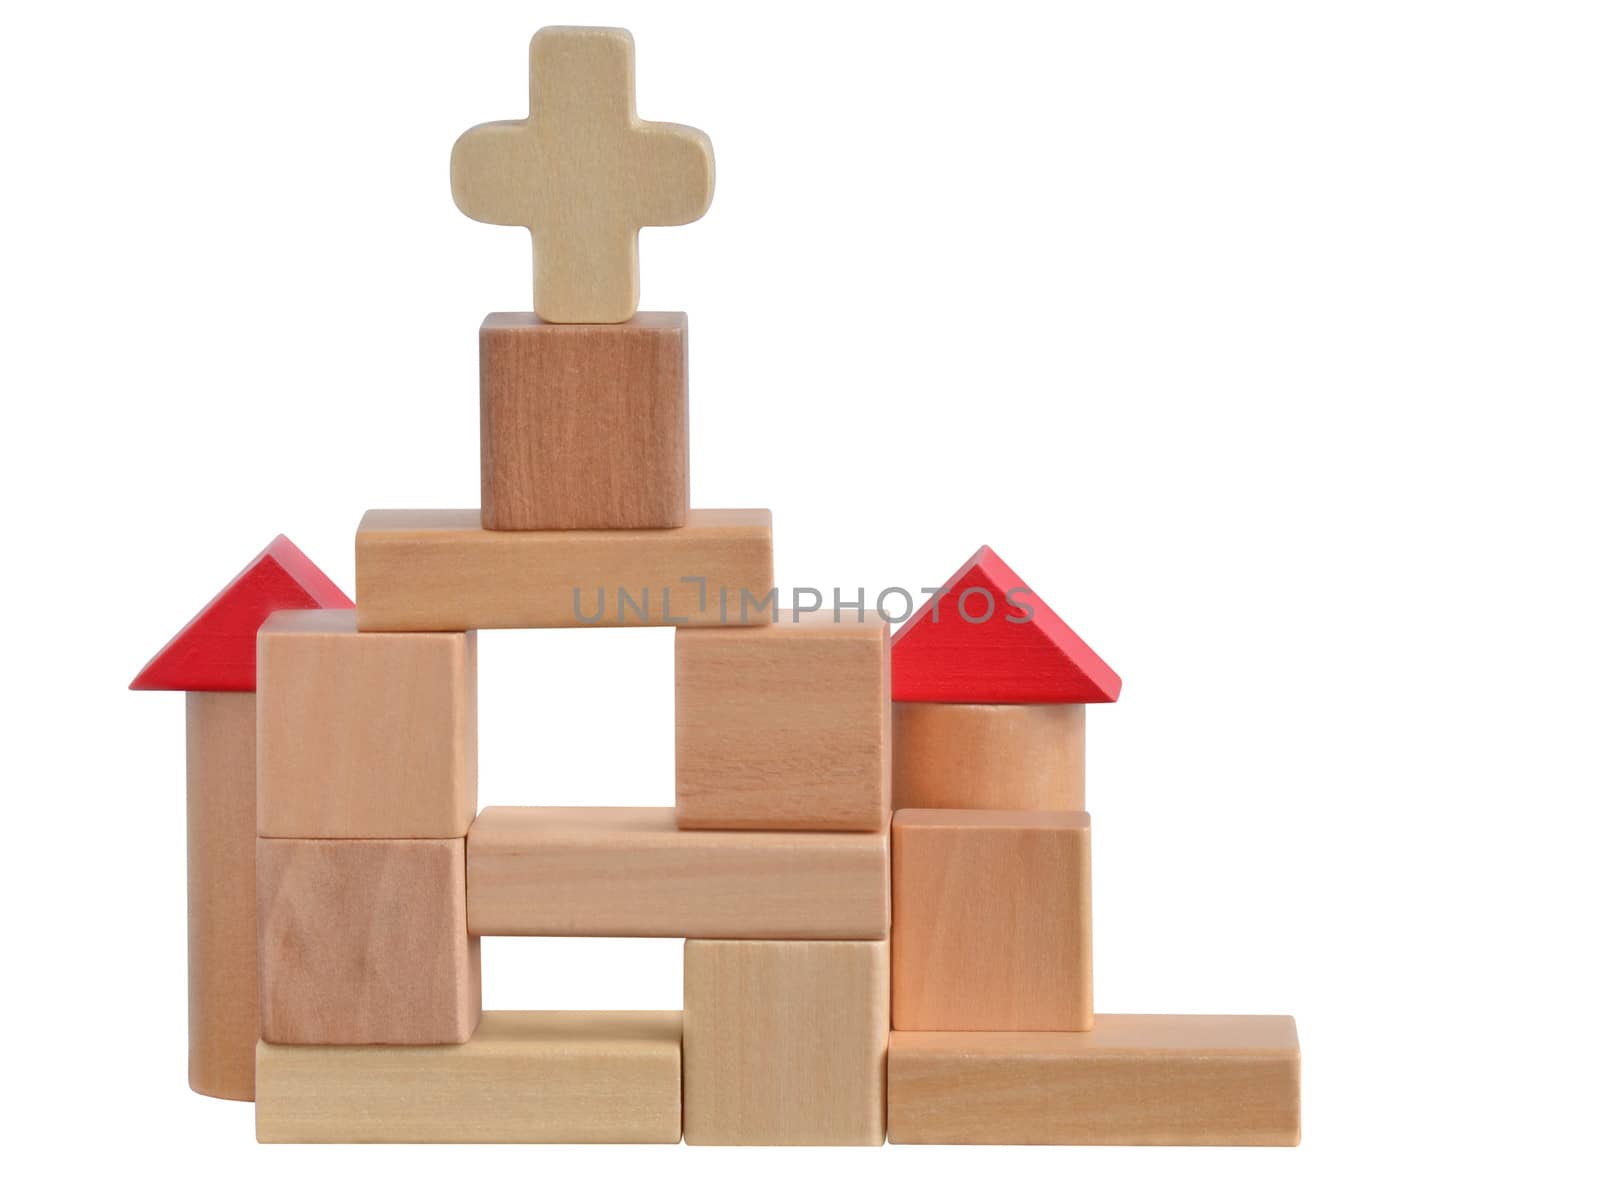 Small church build with wooden blocks toy. Isolated on white background with path.